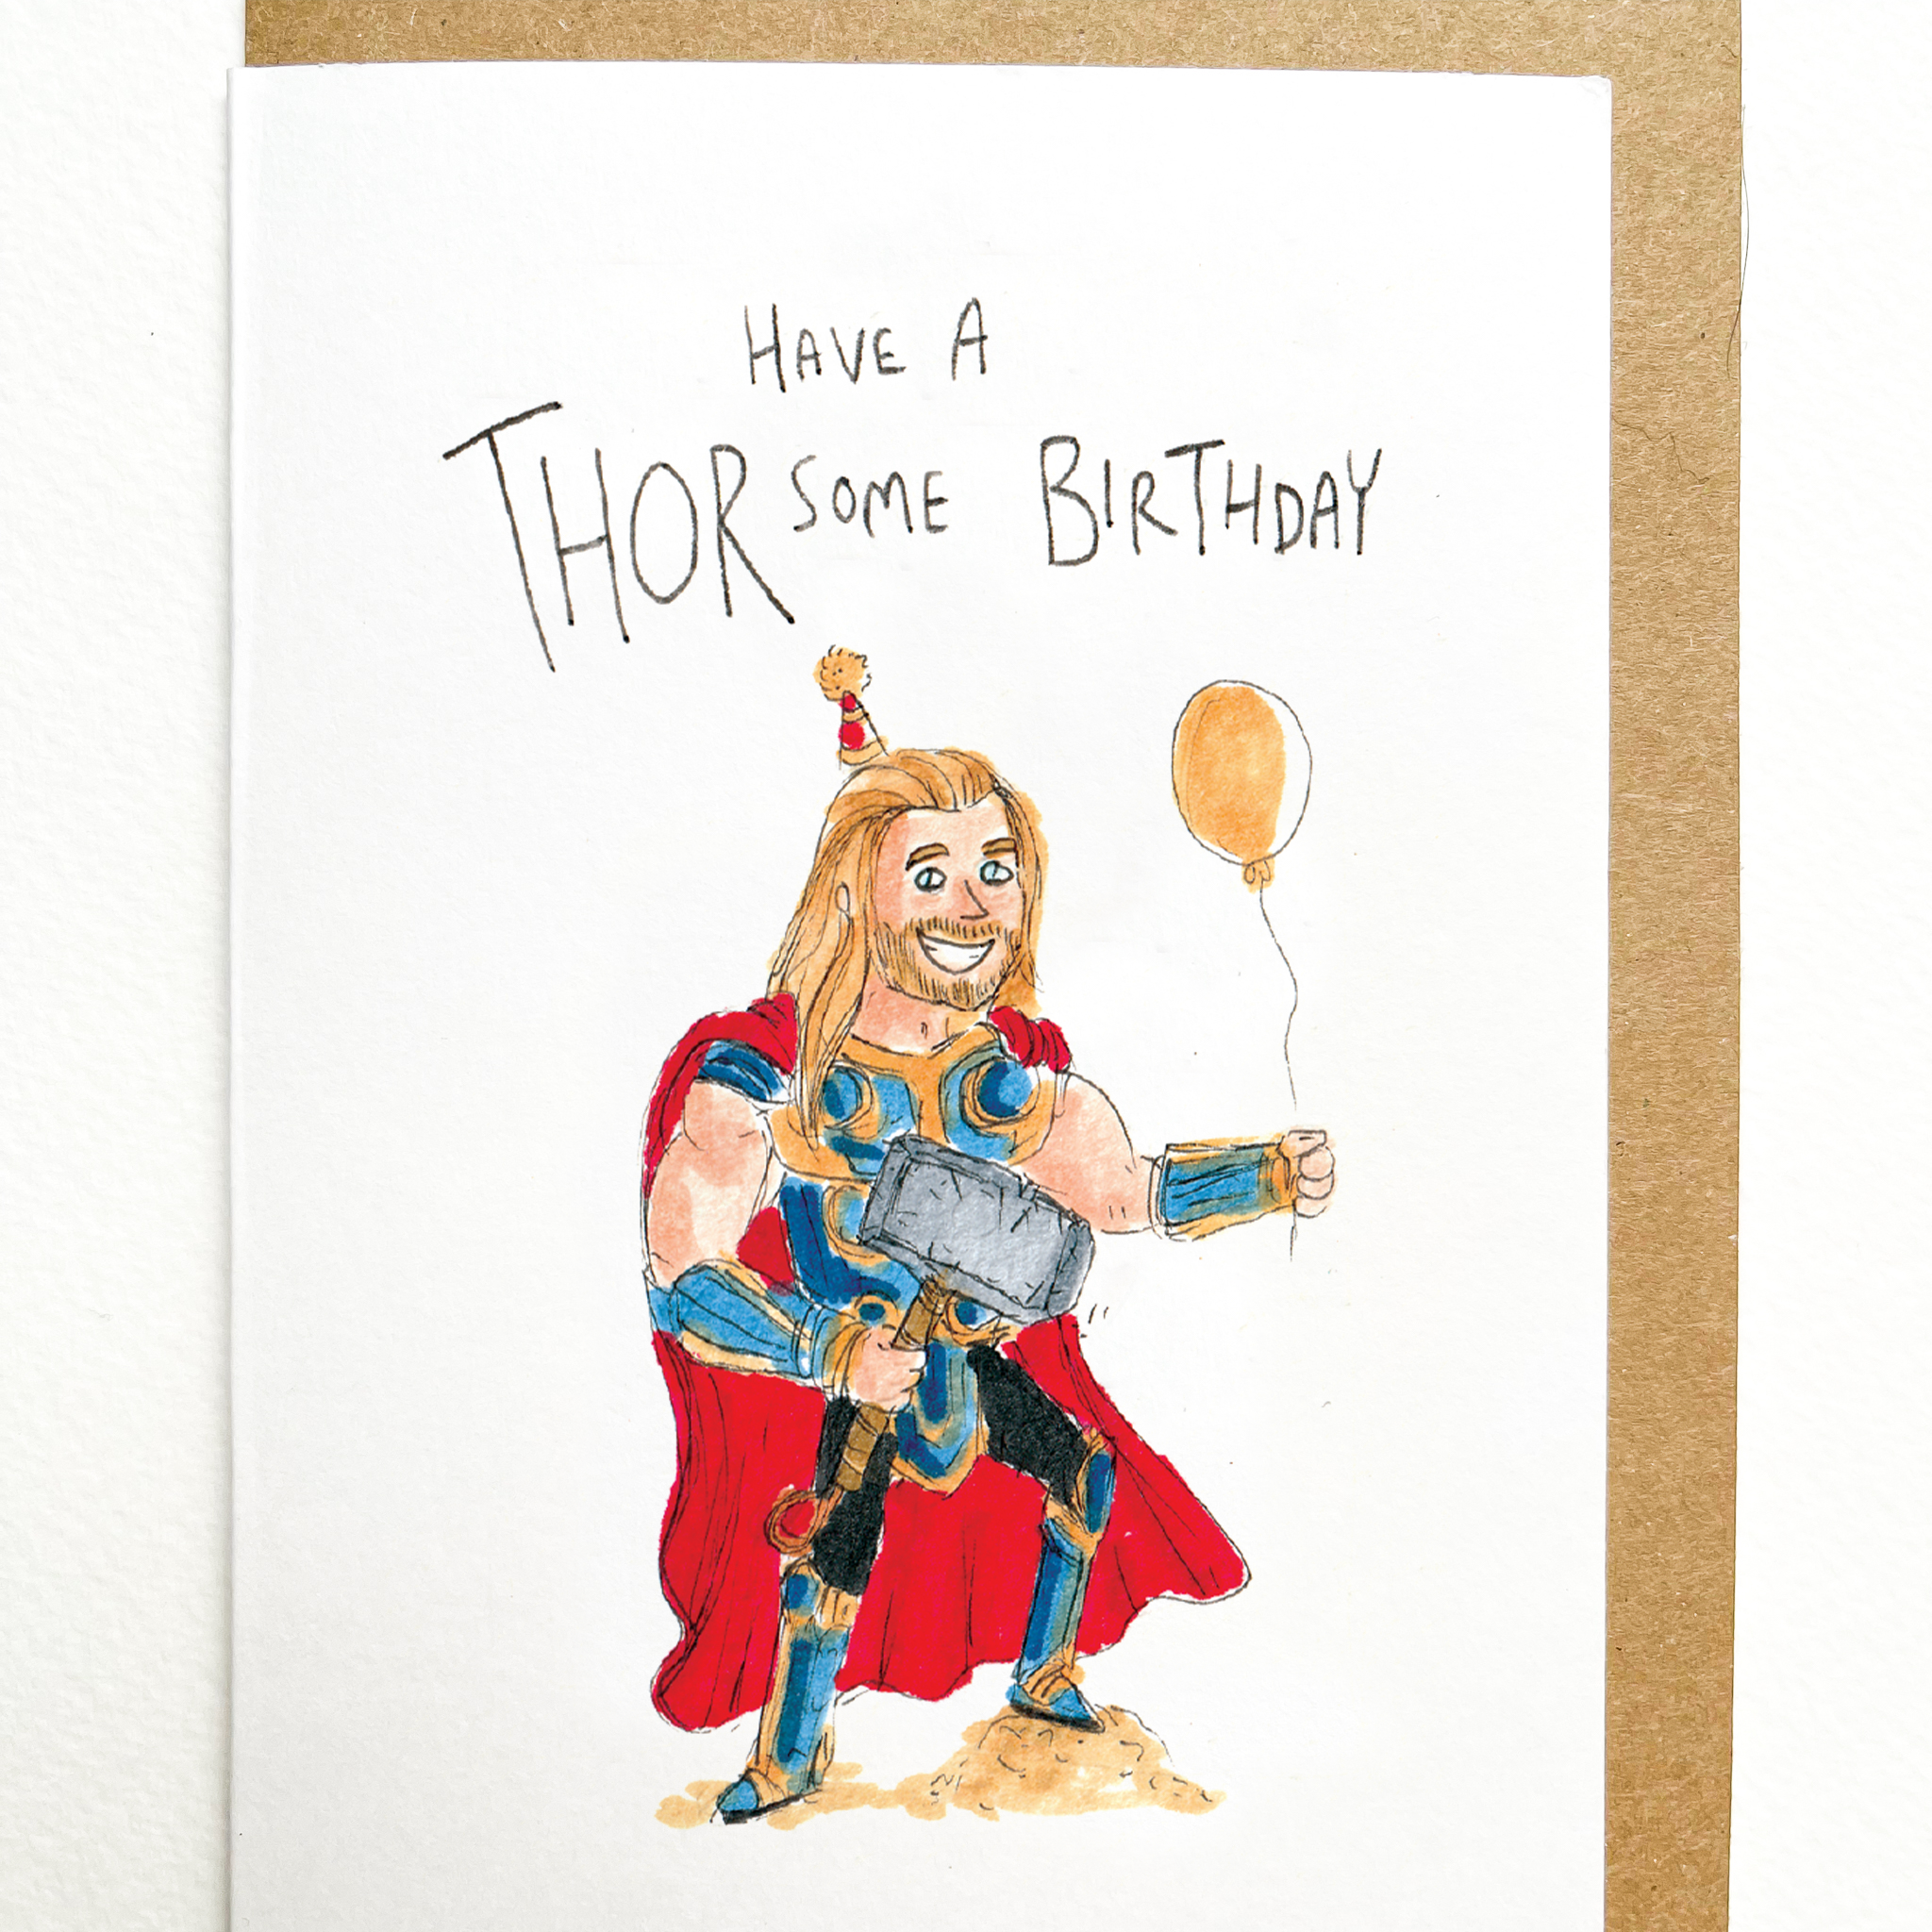 Have a Thorsome Birthday